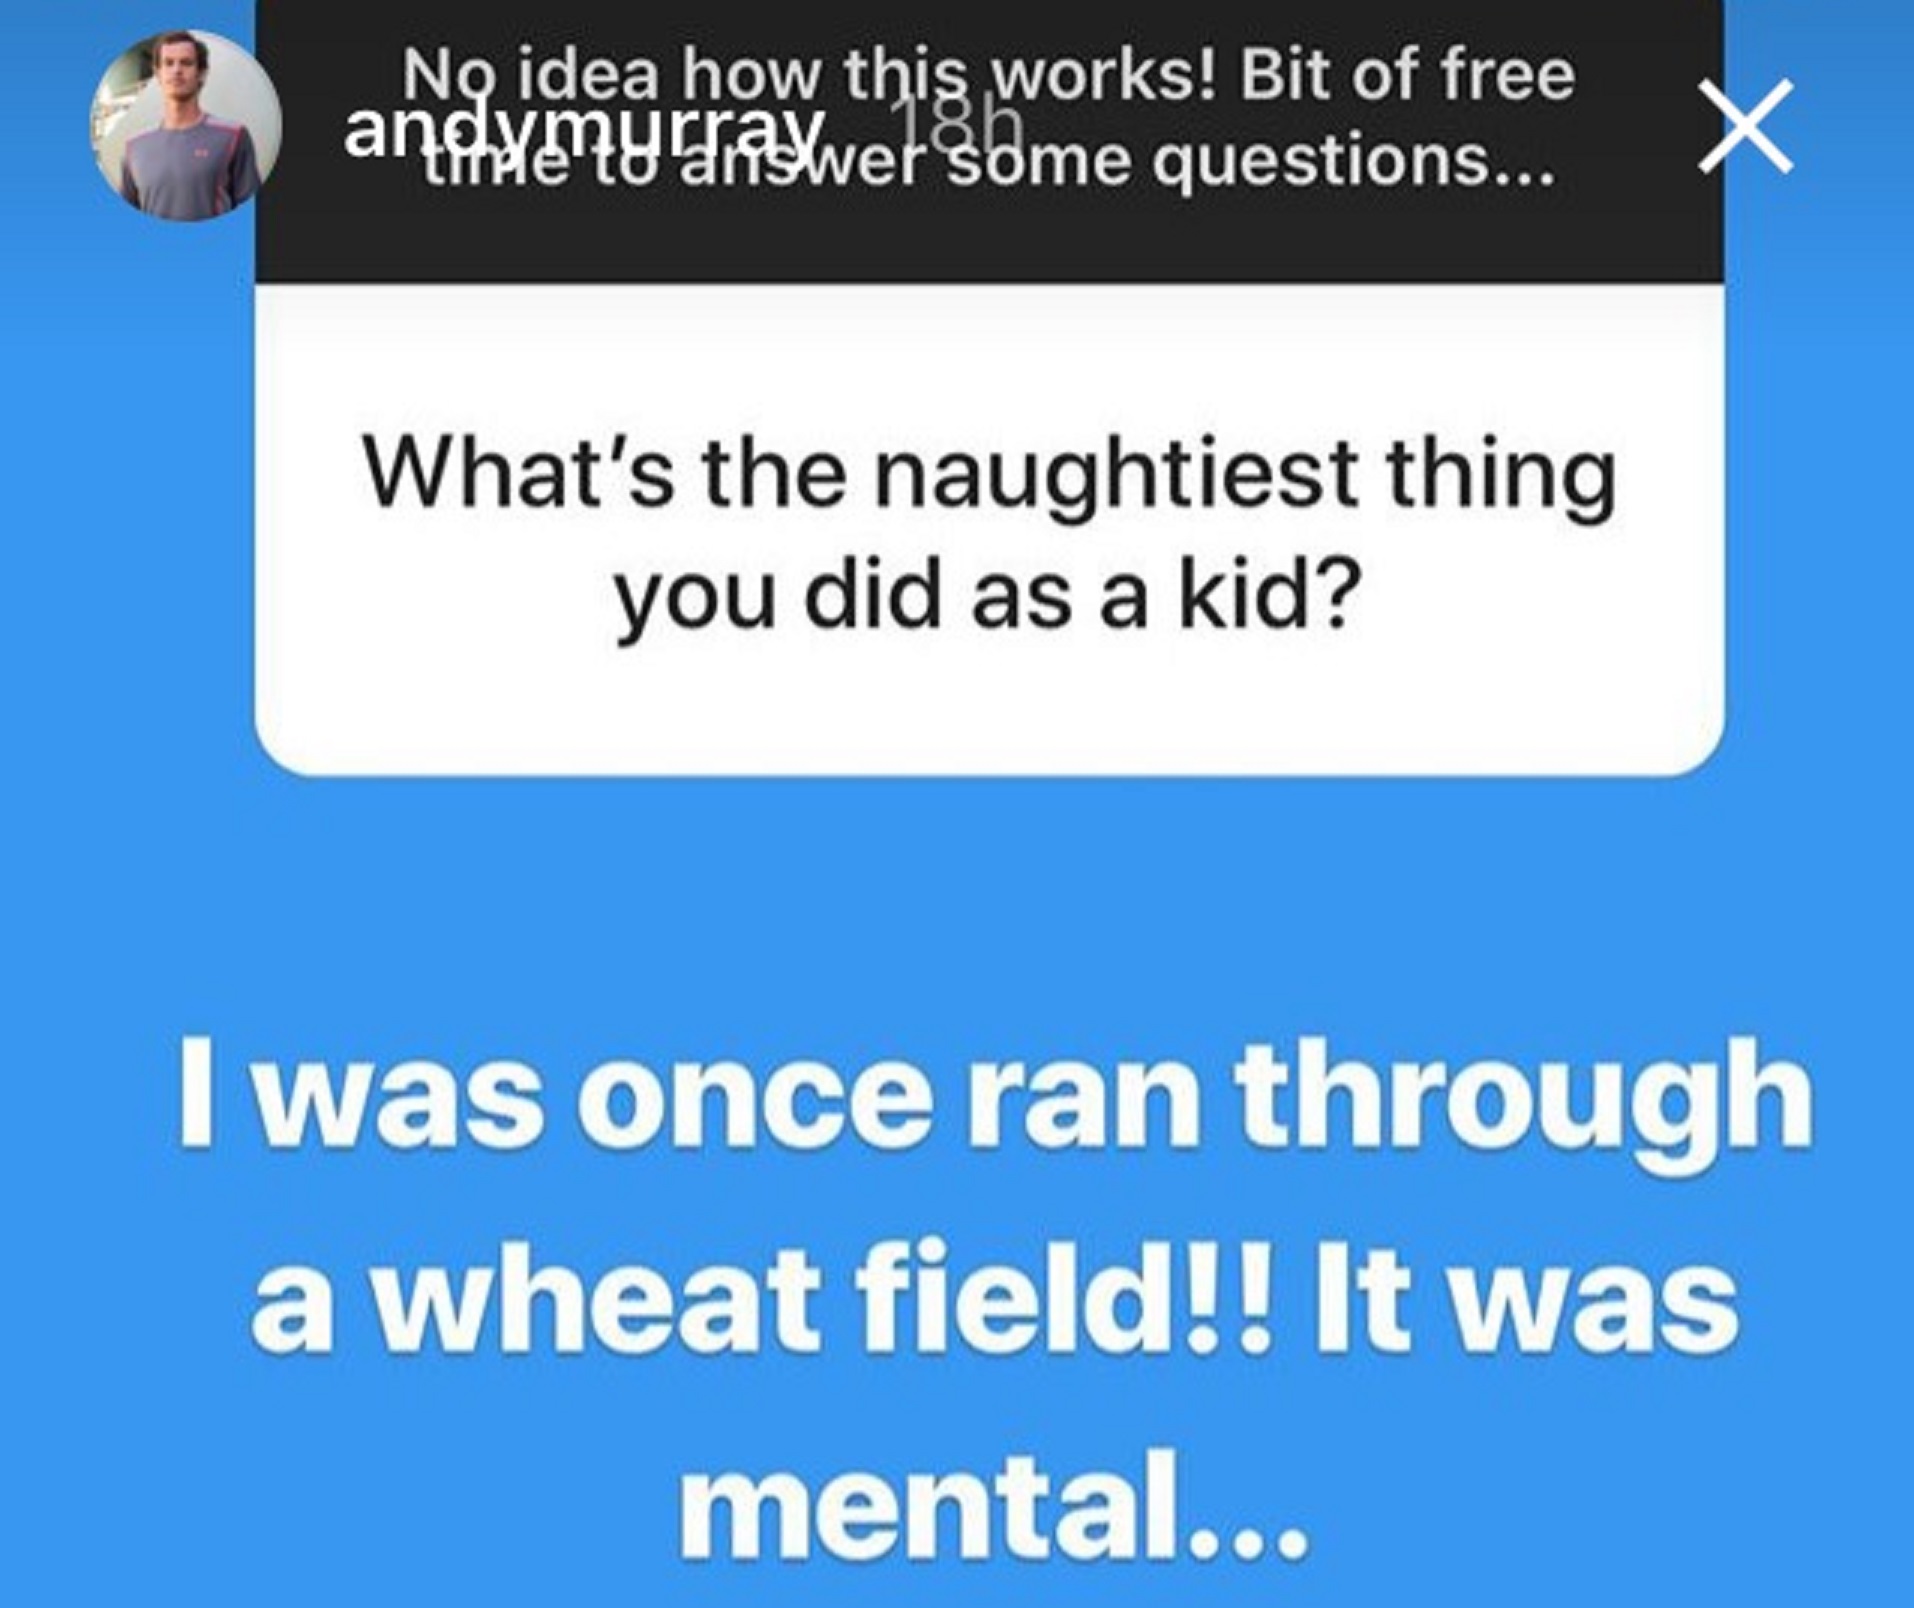 Andy Murray answers questions on his Instagram Story